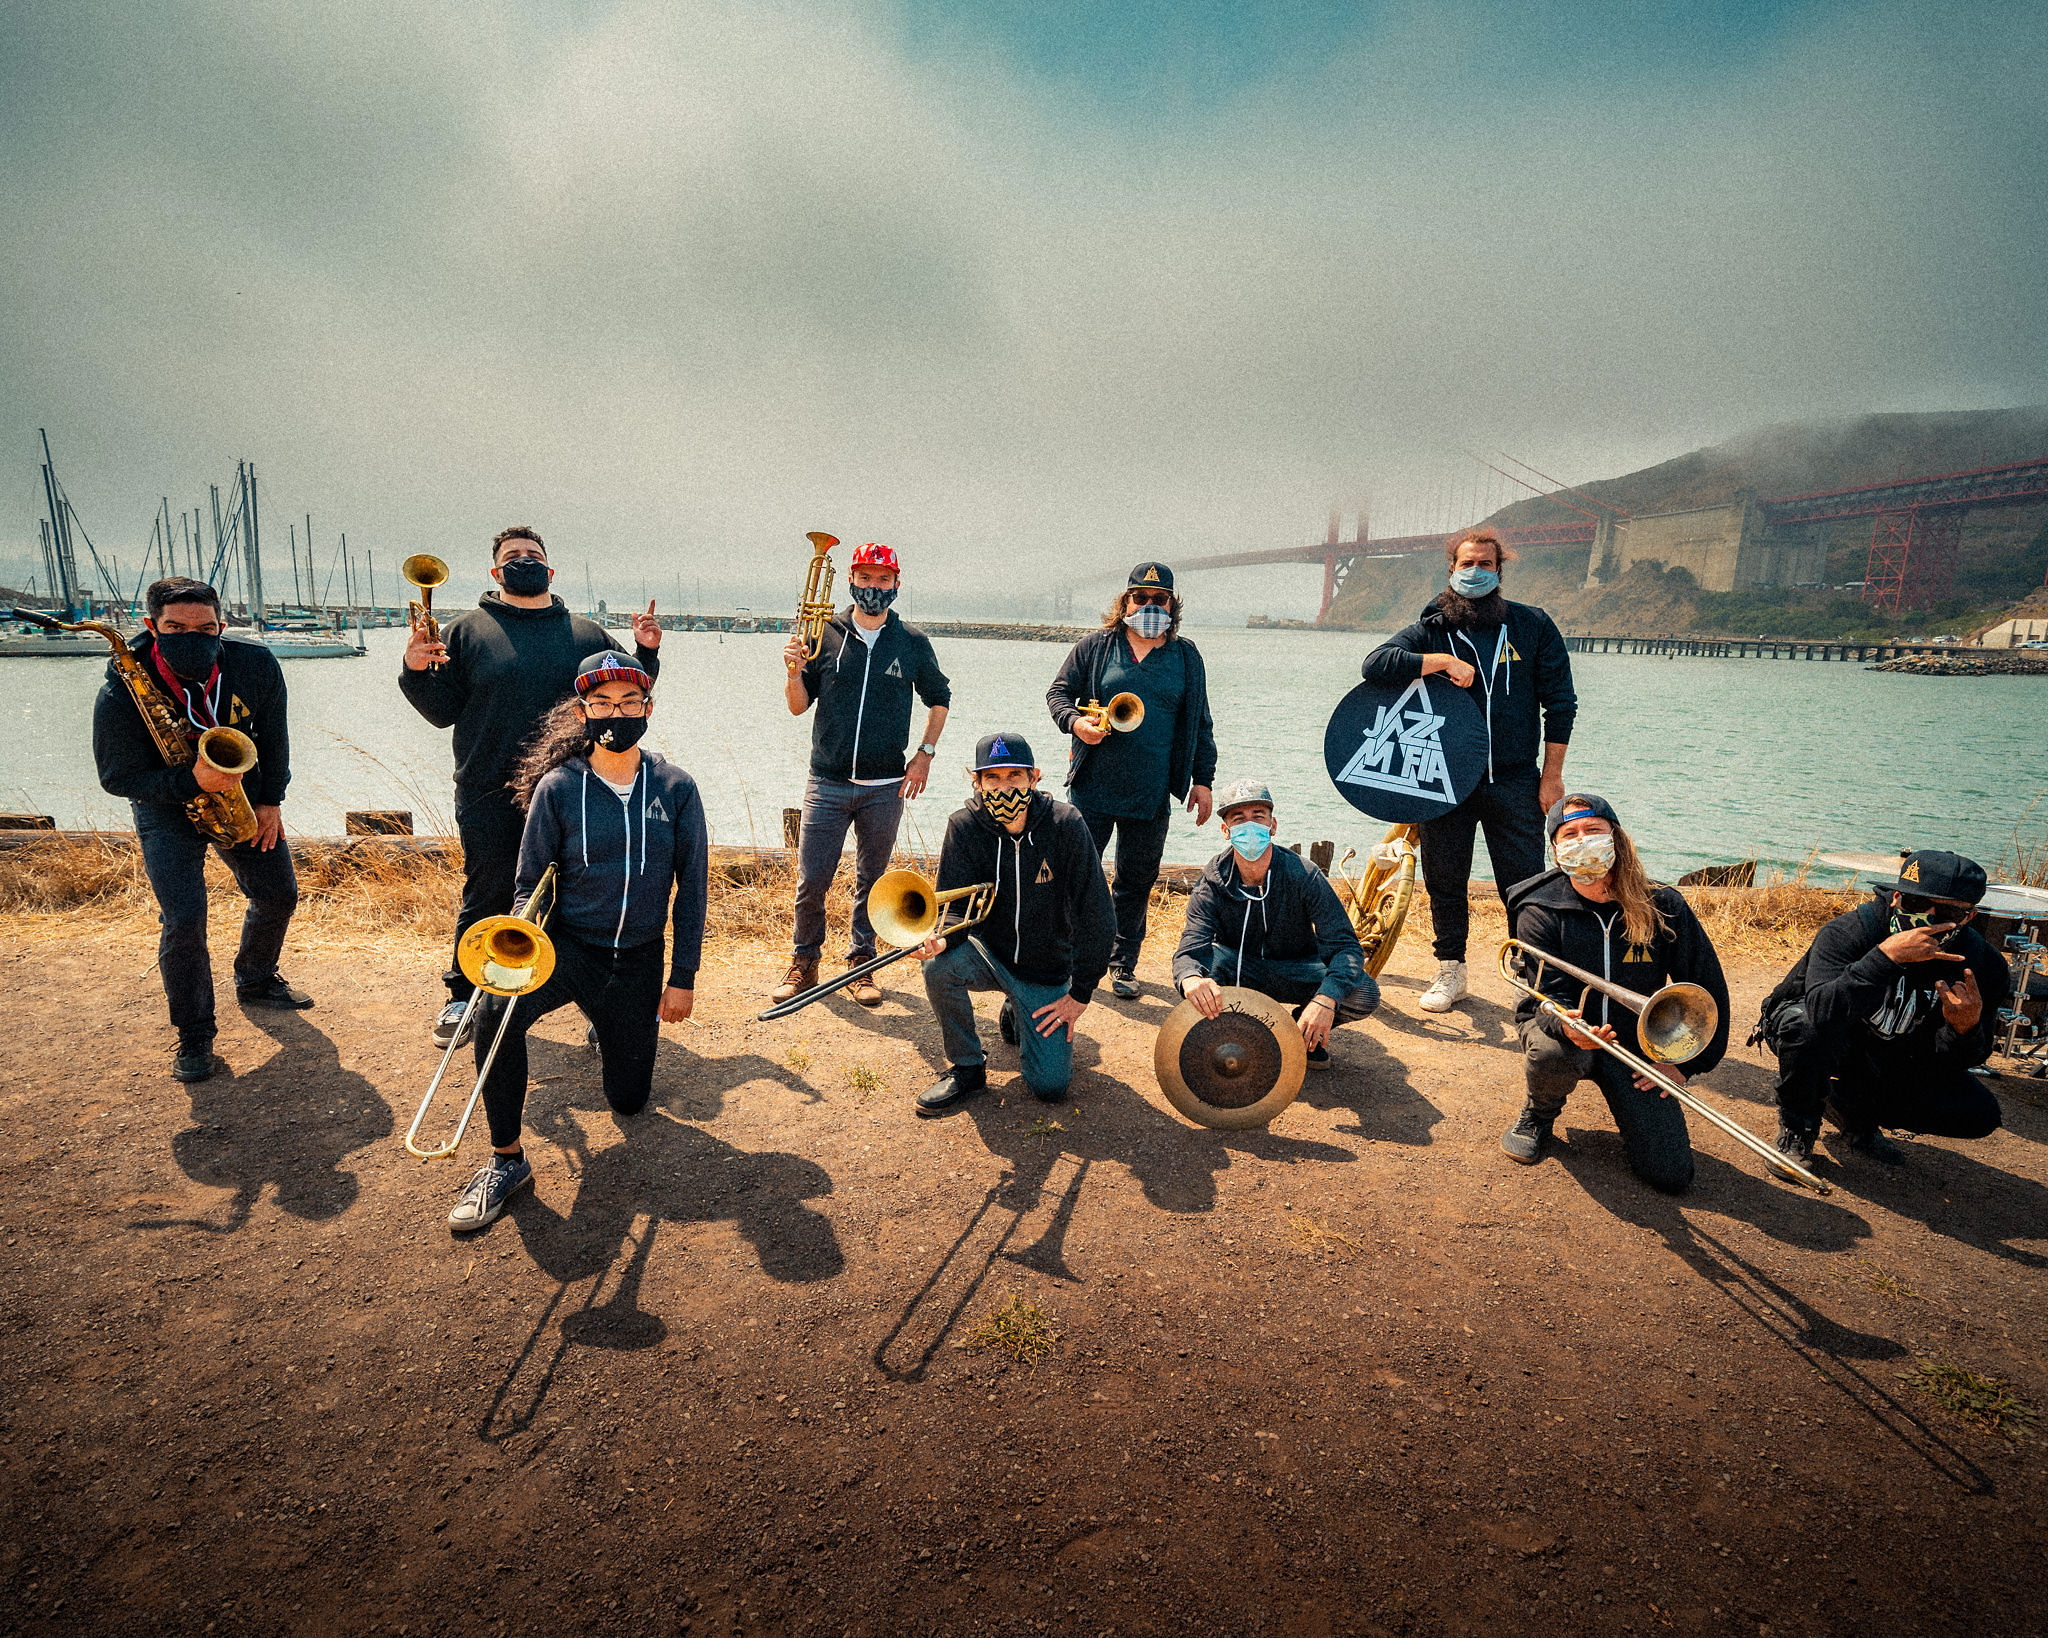 Band posing with instruments by the water